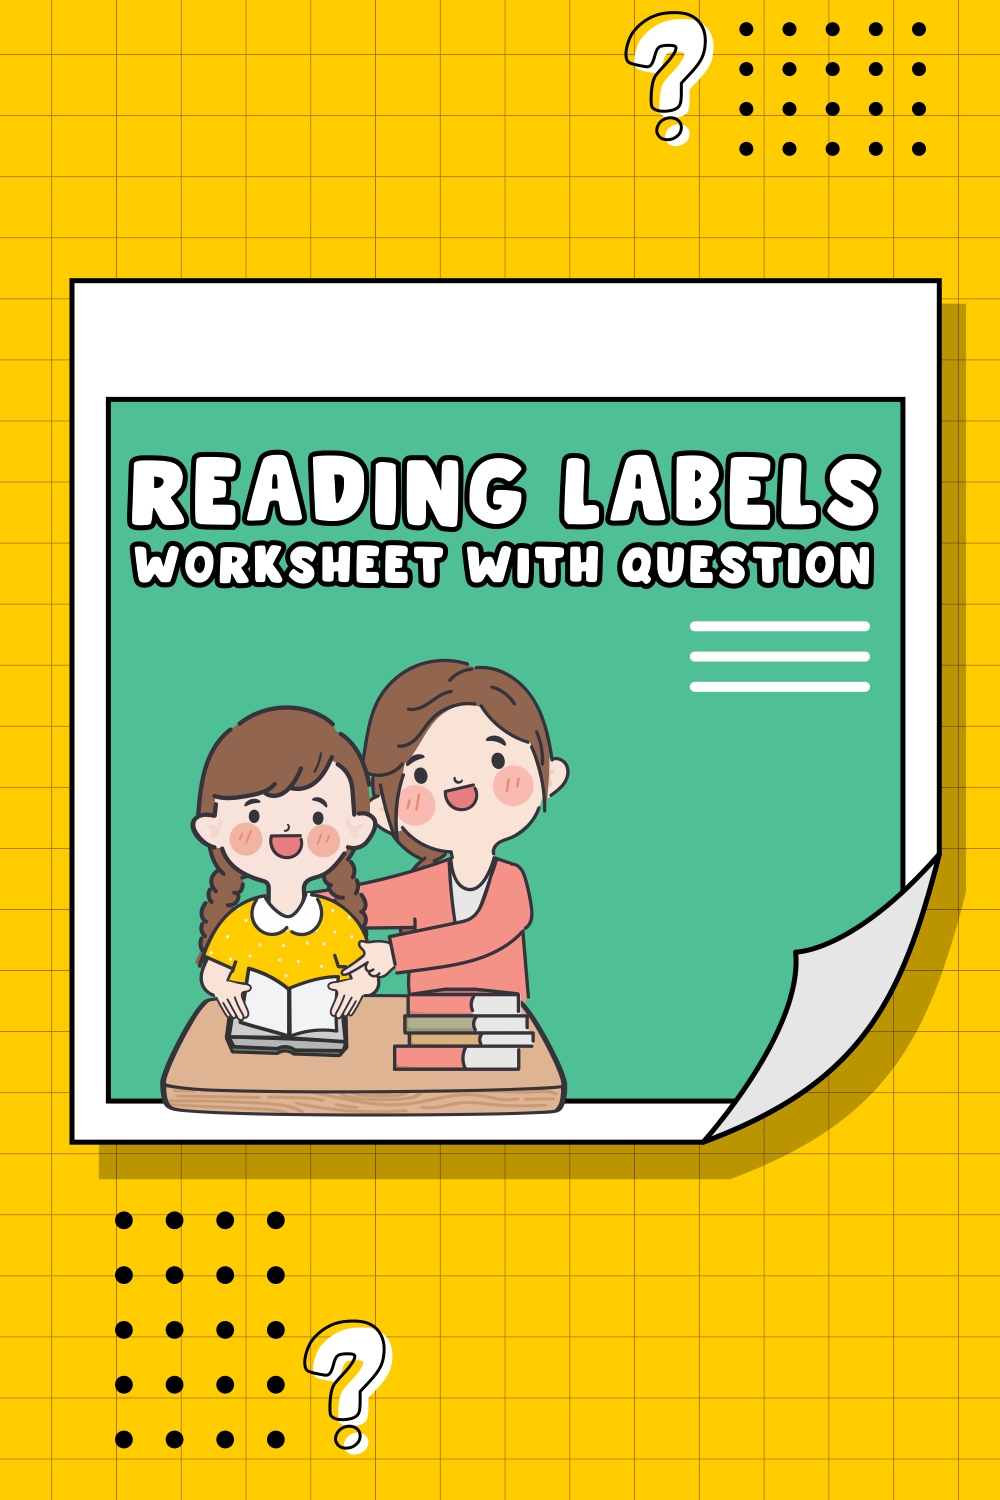 15 Images of Reading Labels Worksheets With Questions